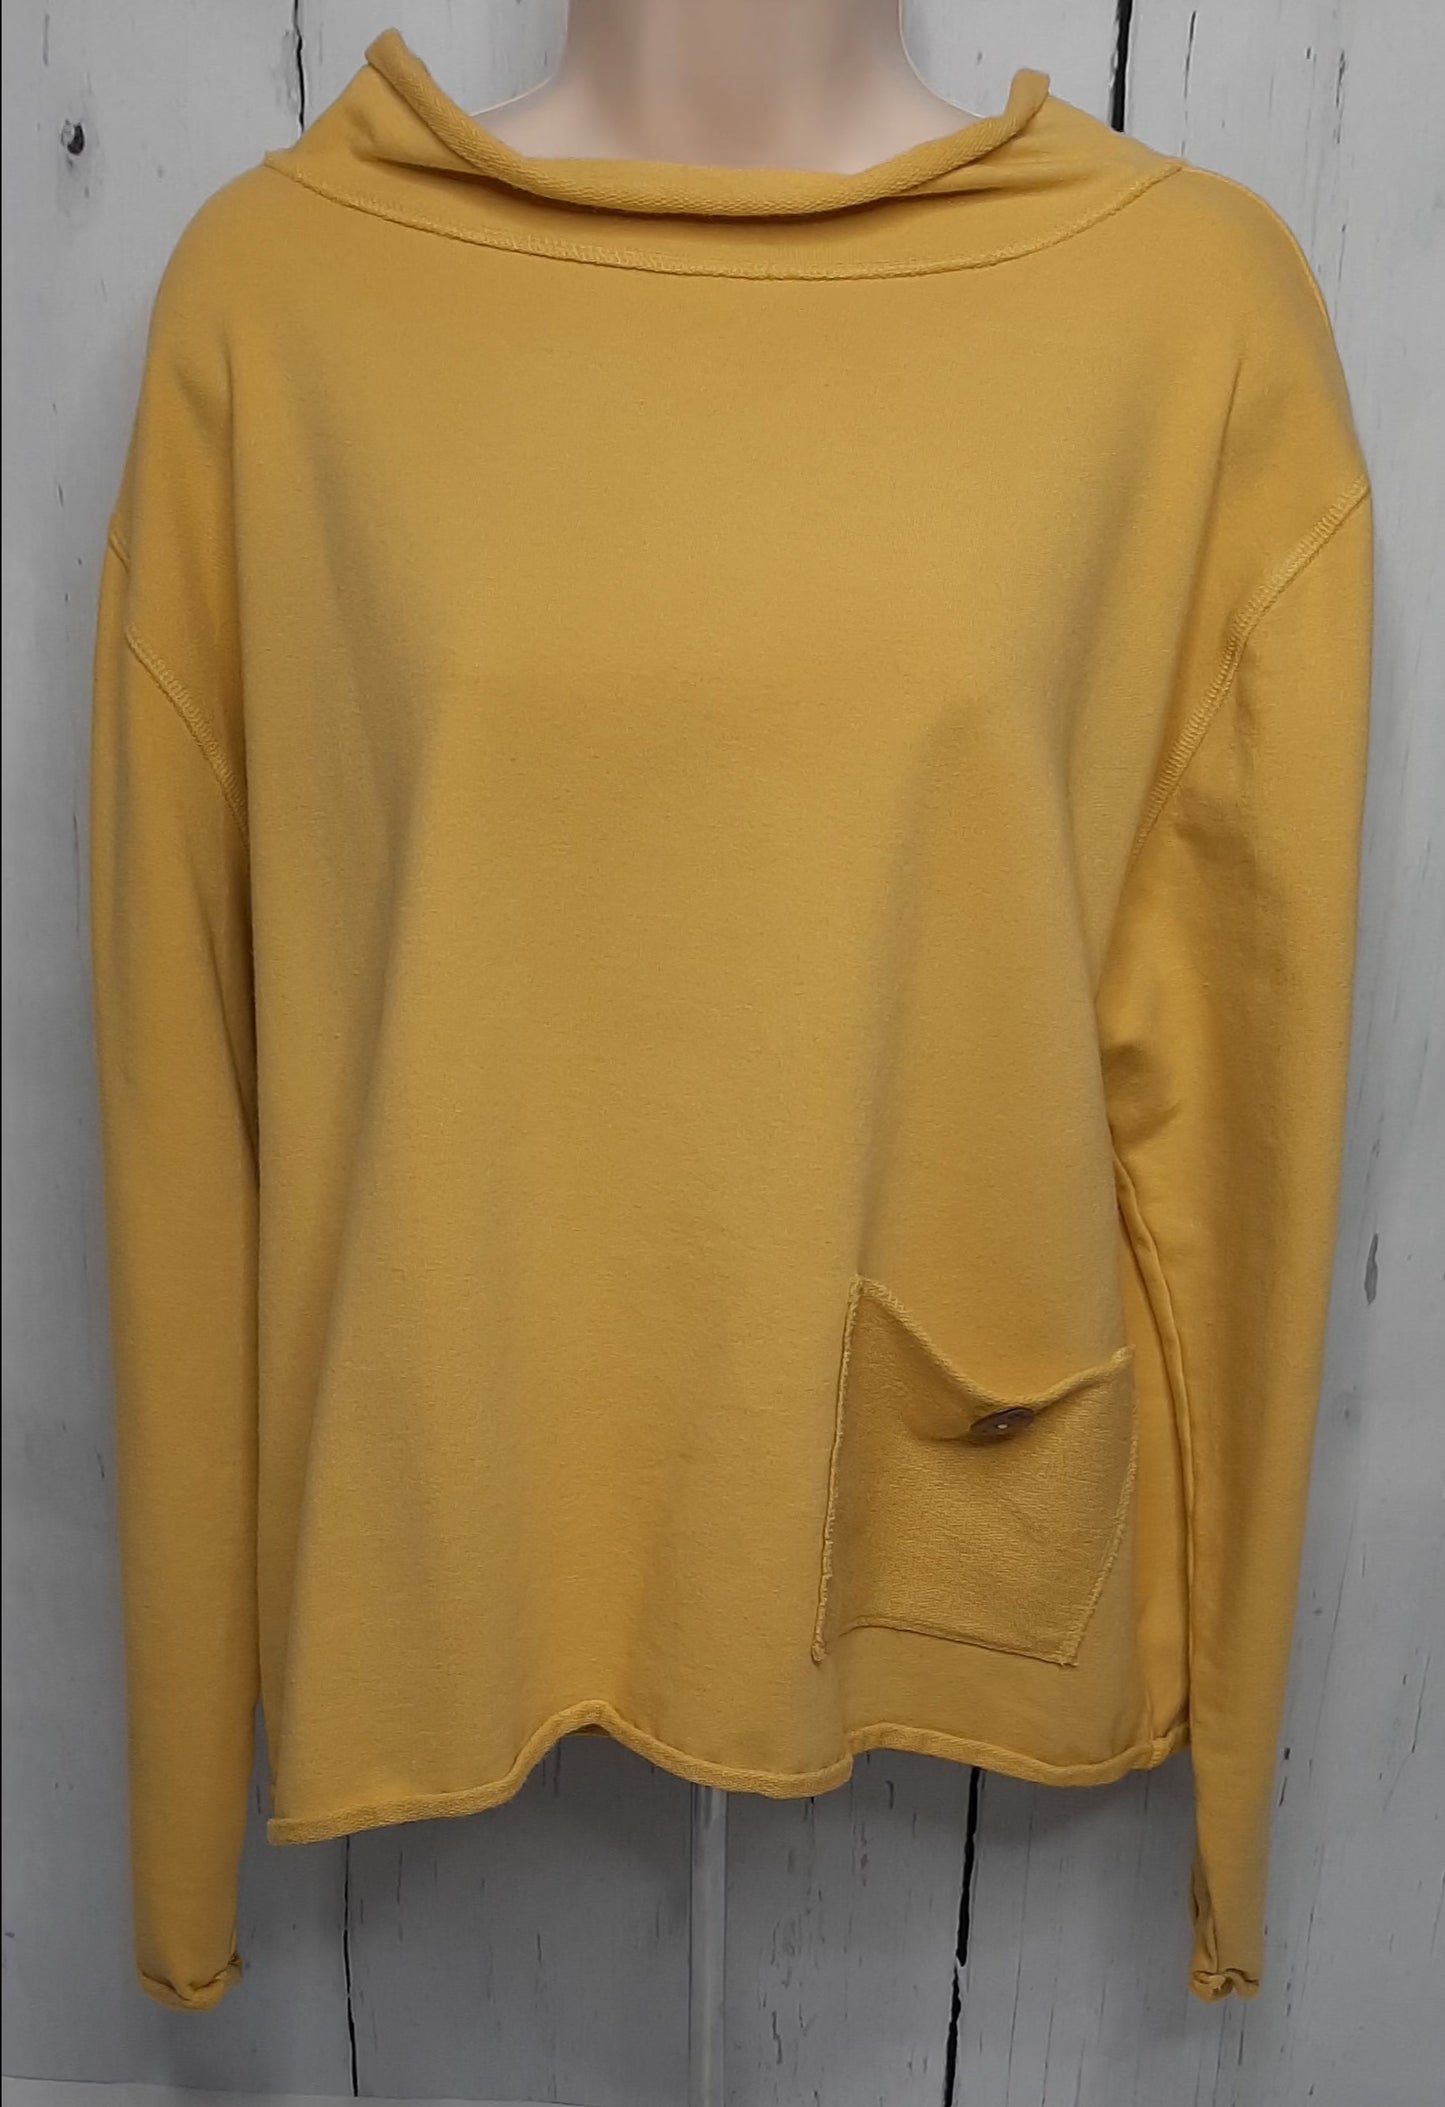 Womens Pullover top - Mustard - French terry Fabric - xlarge 